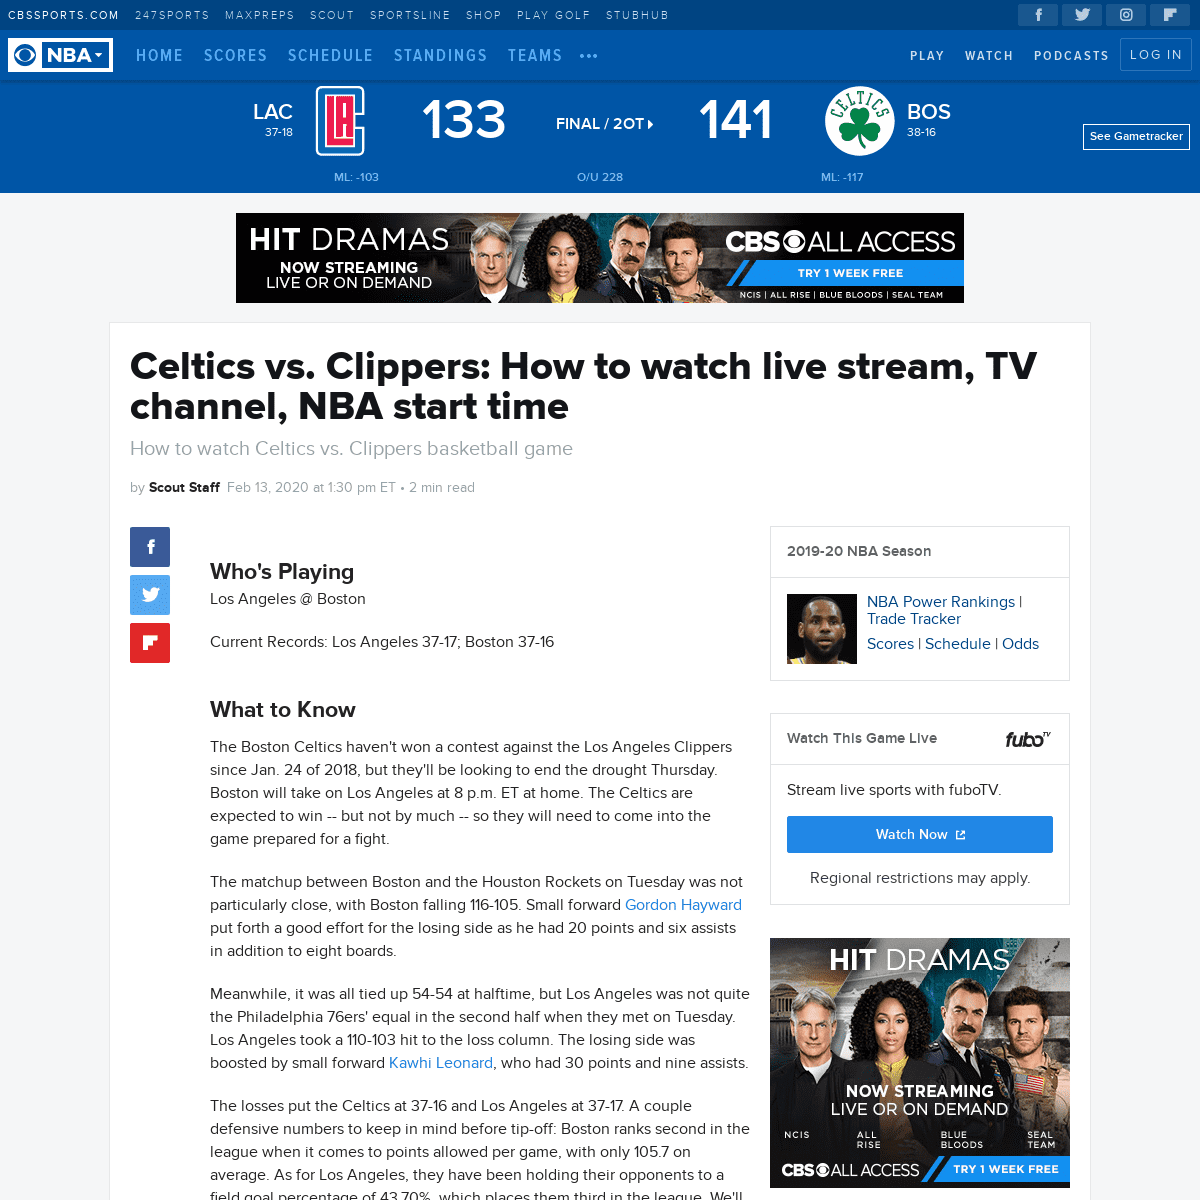 A complete backup of www.cbssports.com/nba/news/celtics-vs-clippers-how-to-watch-live-stream-tv-channel-nba-start-time/